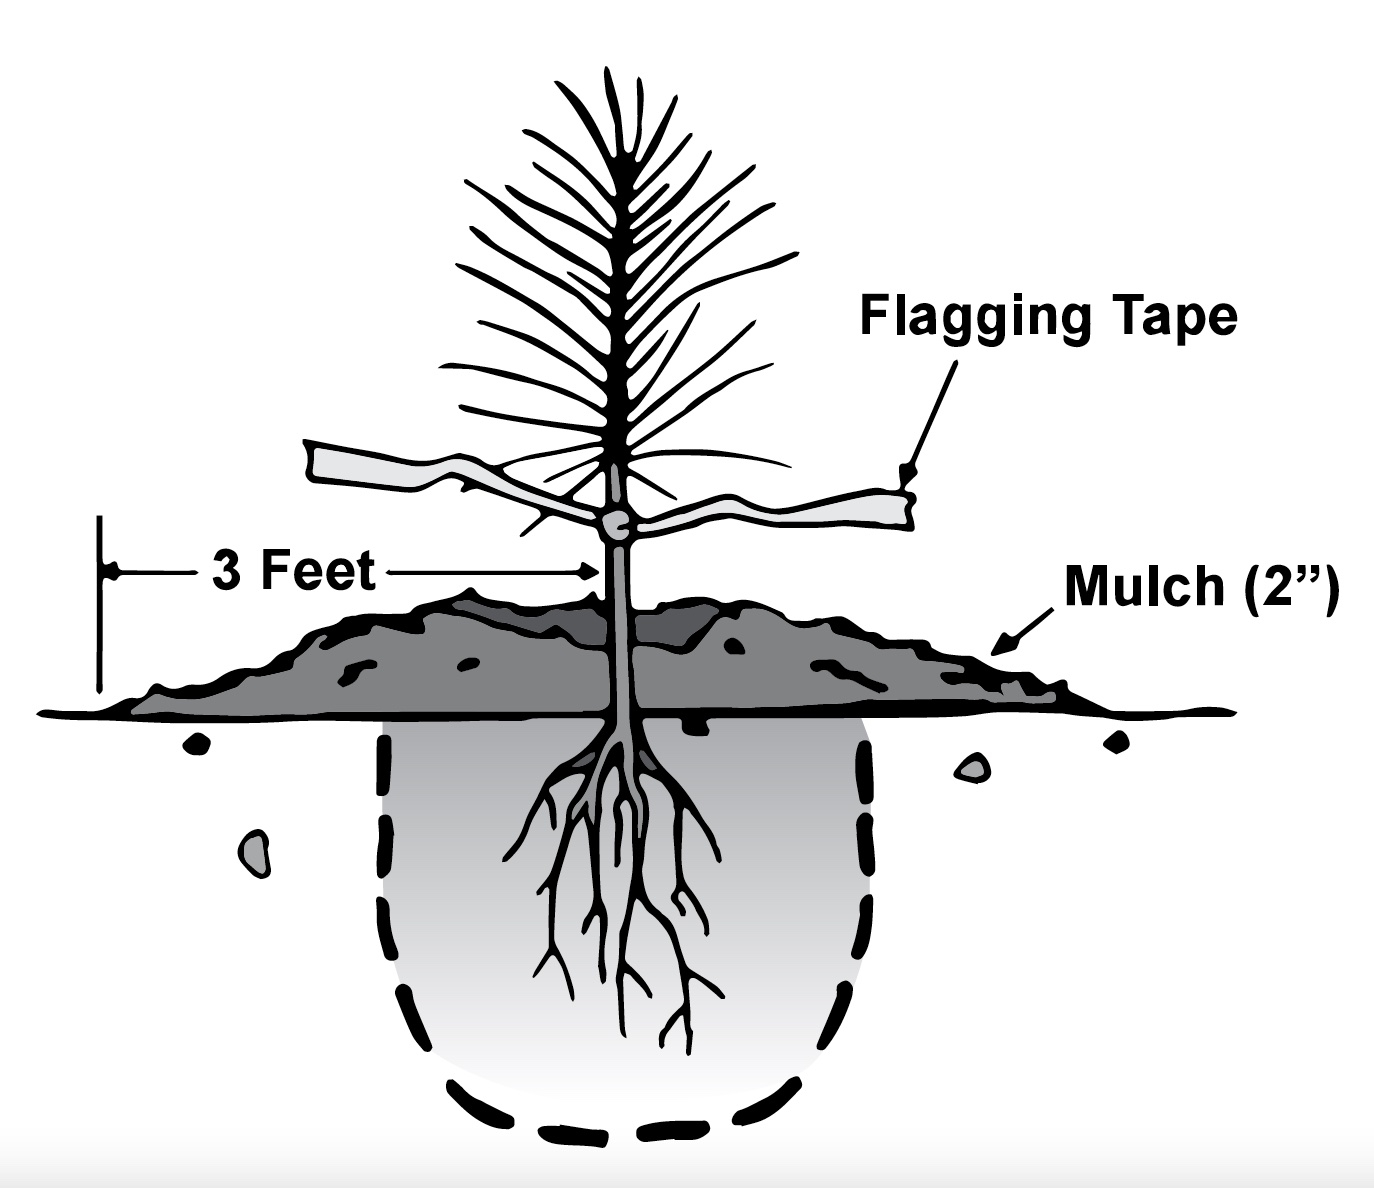 A cut away illustration of a pine seedling planting showing placement of mulch and depth of planting. It shows 2 inches of mulch and the flagging tied just below the needles.